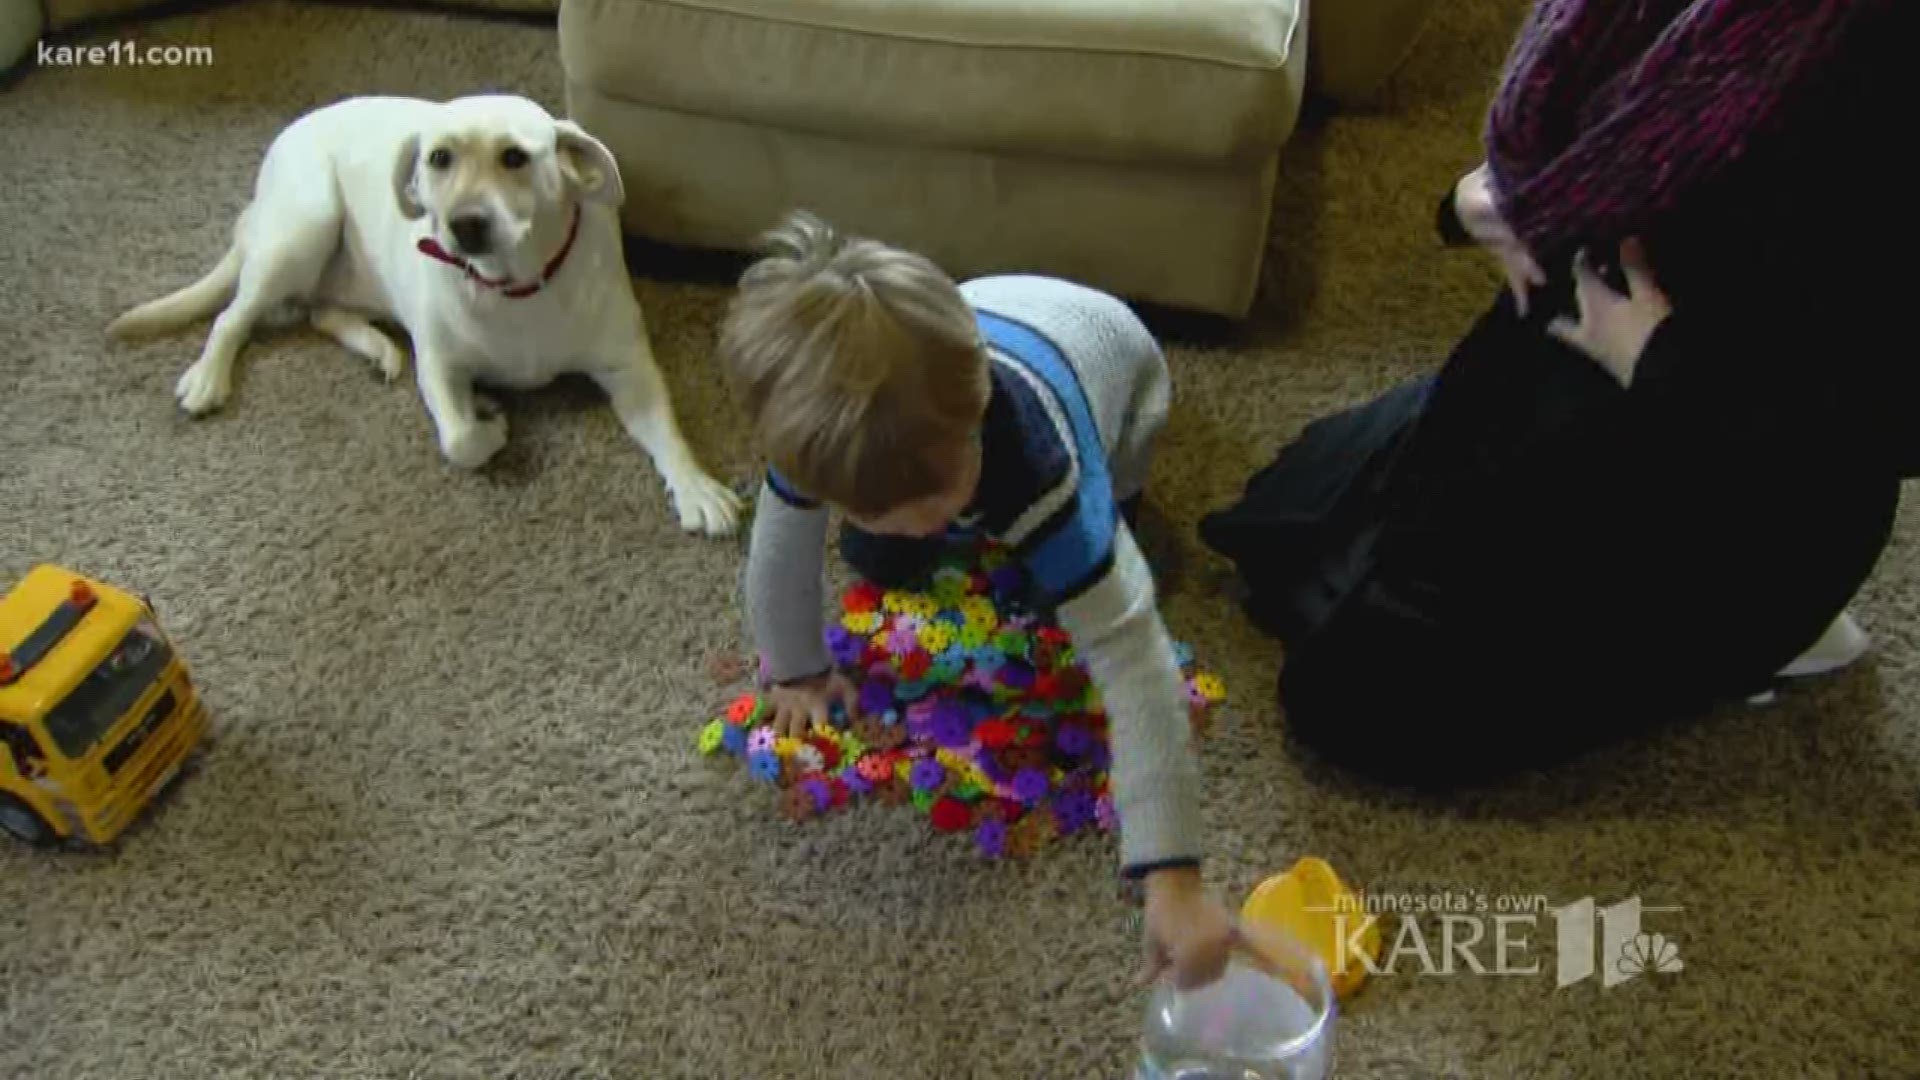 A Minnesota family paid thousands of dollars for a service dog to save their little boy's life. But they say the dog growls, lunges and can't be taken out in public. They are just one of 20 families across the country who say Diabetic Alert Dogs of Americ